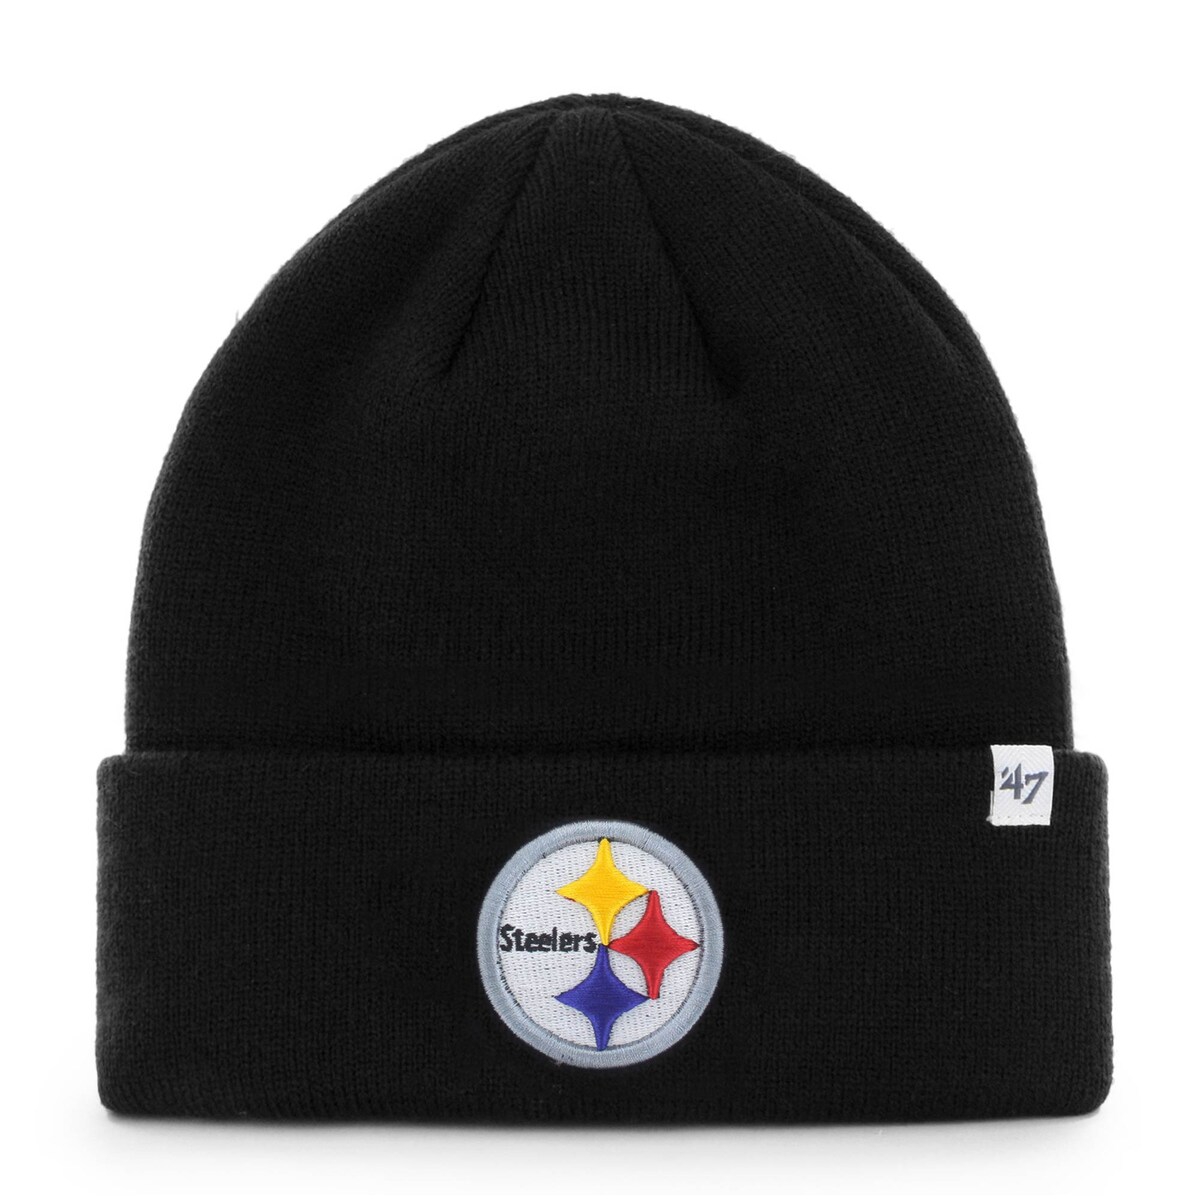 '47 Men's Black Pittsburgh Steelers Primary Basic Cuffed Knit Hat - Black